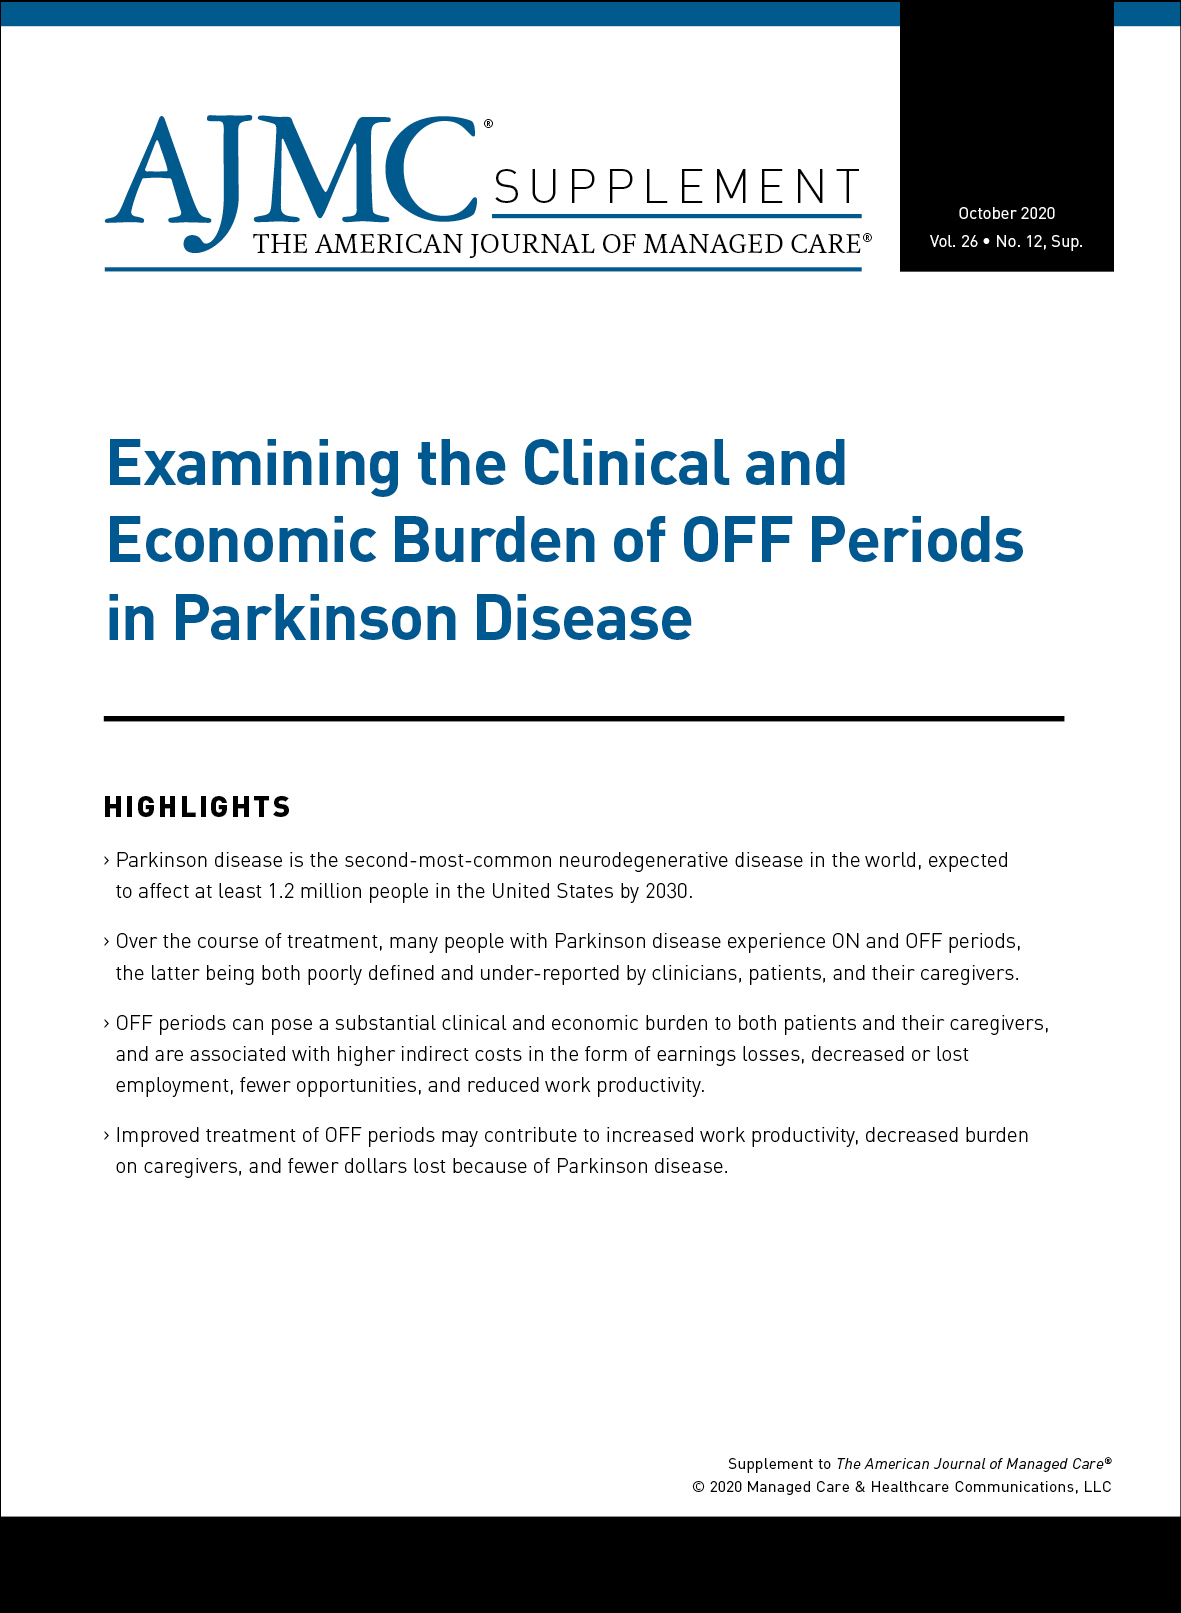 Examining the Clinical and Economic Burden of OFF Periods in Parkinson Disease